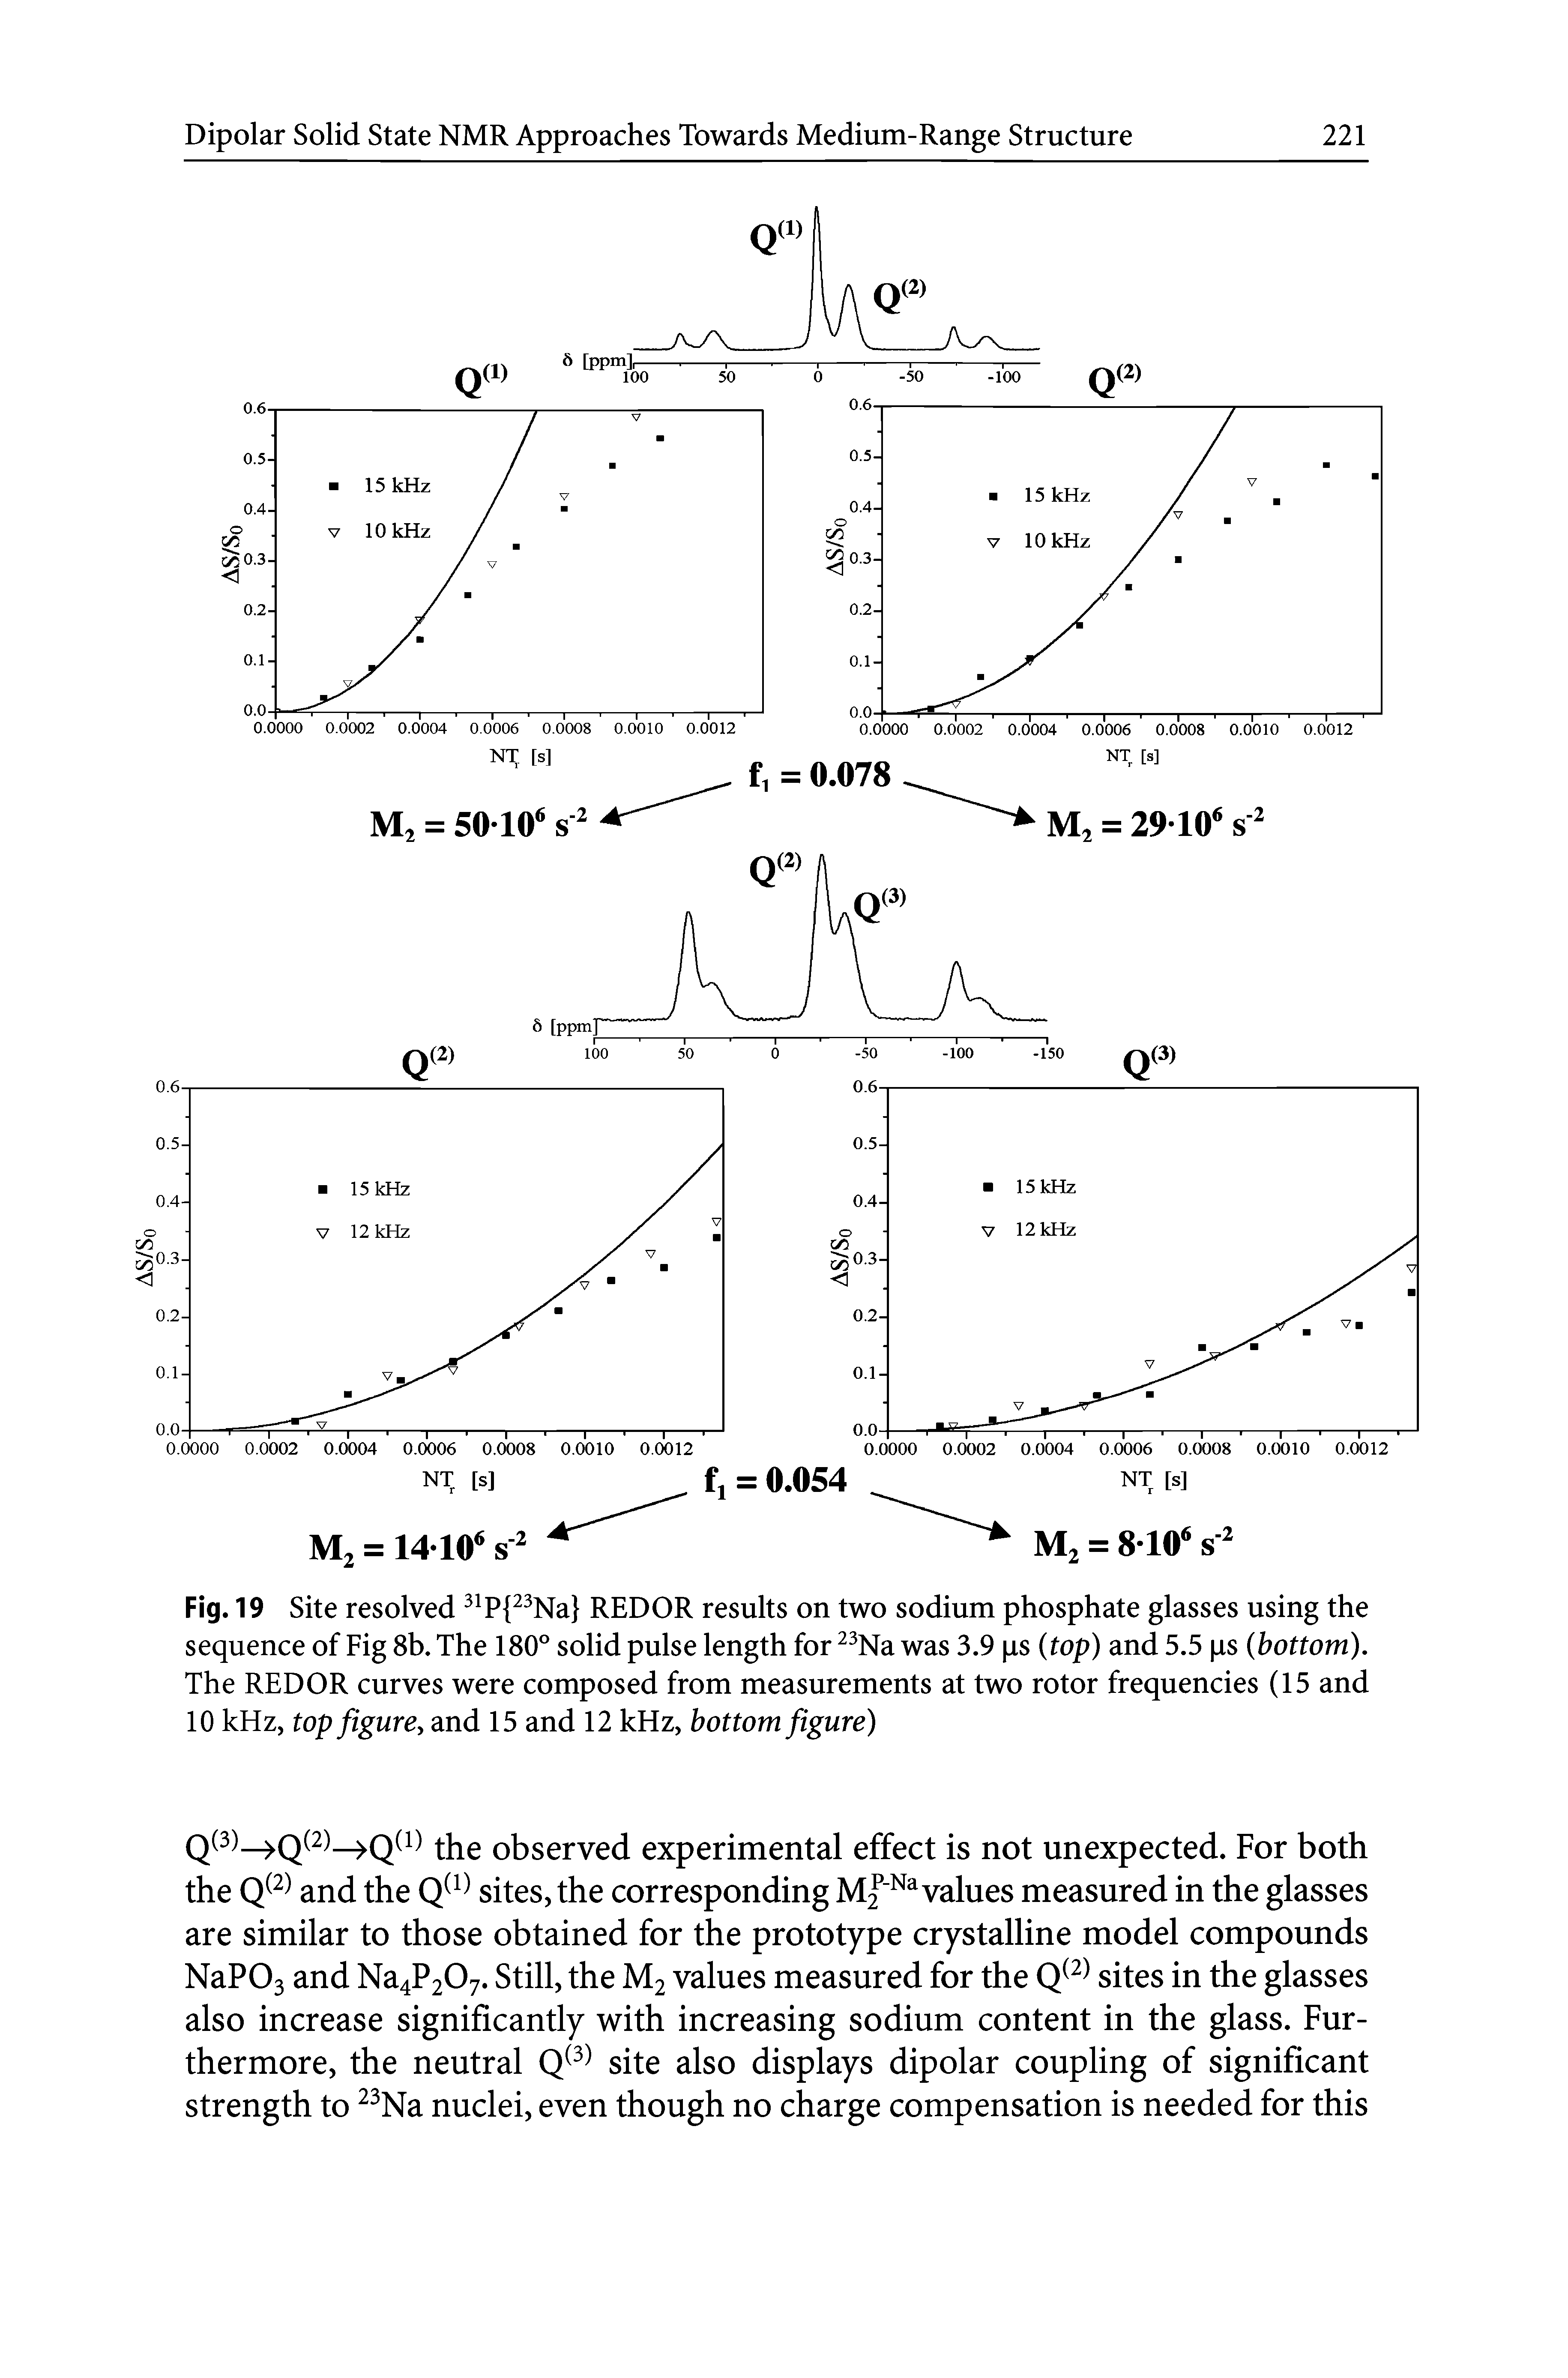 Fig. 19 Site resolved Pj Na REDOR results on two sodium phosphate glasses using the sequence of Fig 8b. The 180° solid pulse length for Na was 3.9 ps (top) and 5.5 ps (bottom). The REDOR curves were composed from measurements at two rotor frequencies (15 and 10 kHz, top figure and 15 and 12 kHz, bottom figure)...